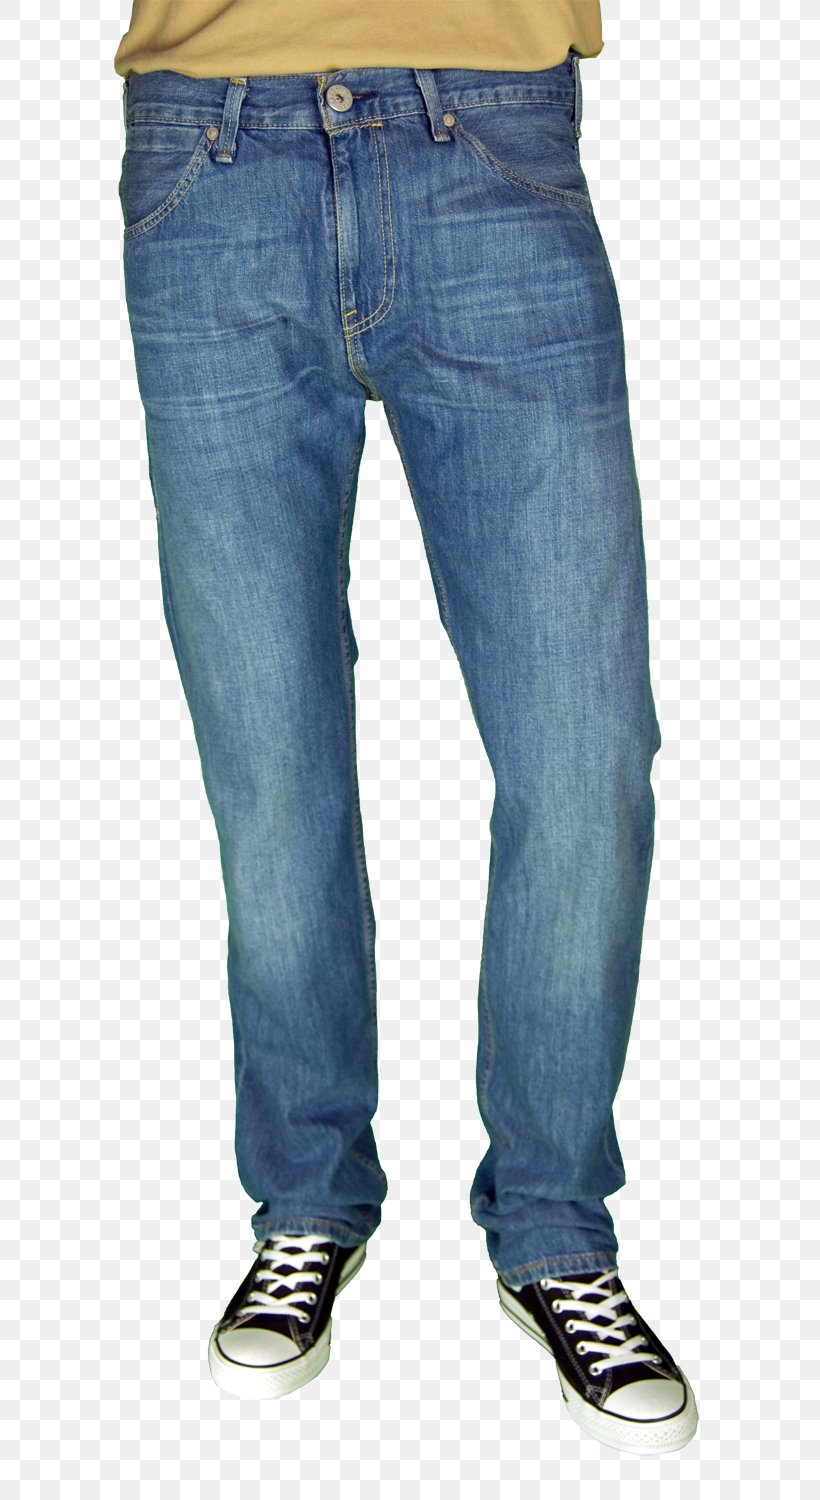 Jeans Pants Clothing Denim Blue, PNG, 750x1500px, Jeans, Blue, Chino Cloth, Clothing, Denim Download Free